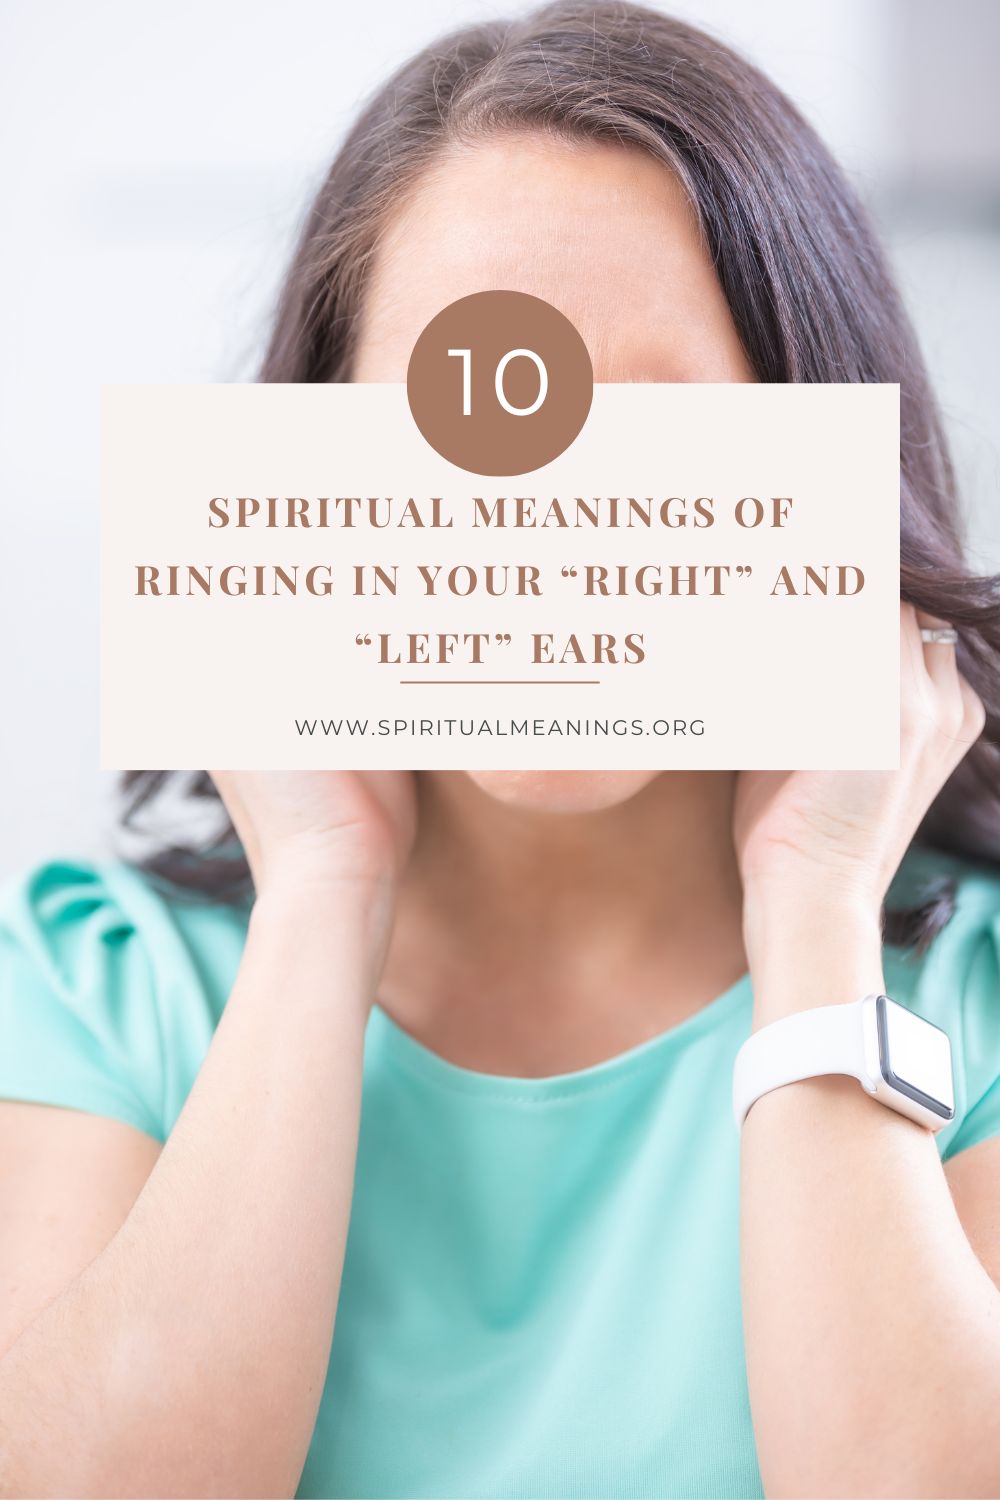 10 Spiritual Meanings Of Ringing In Your “Right” And “Left” Ears